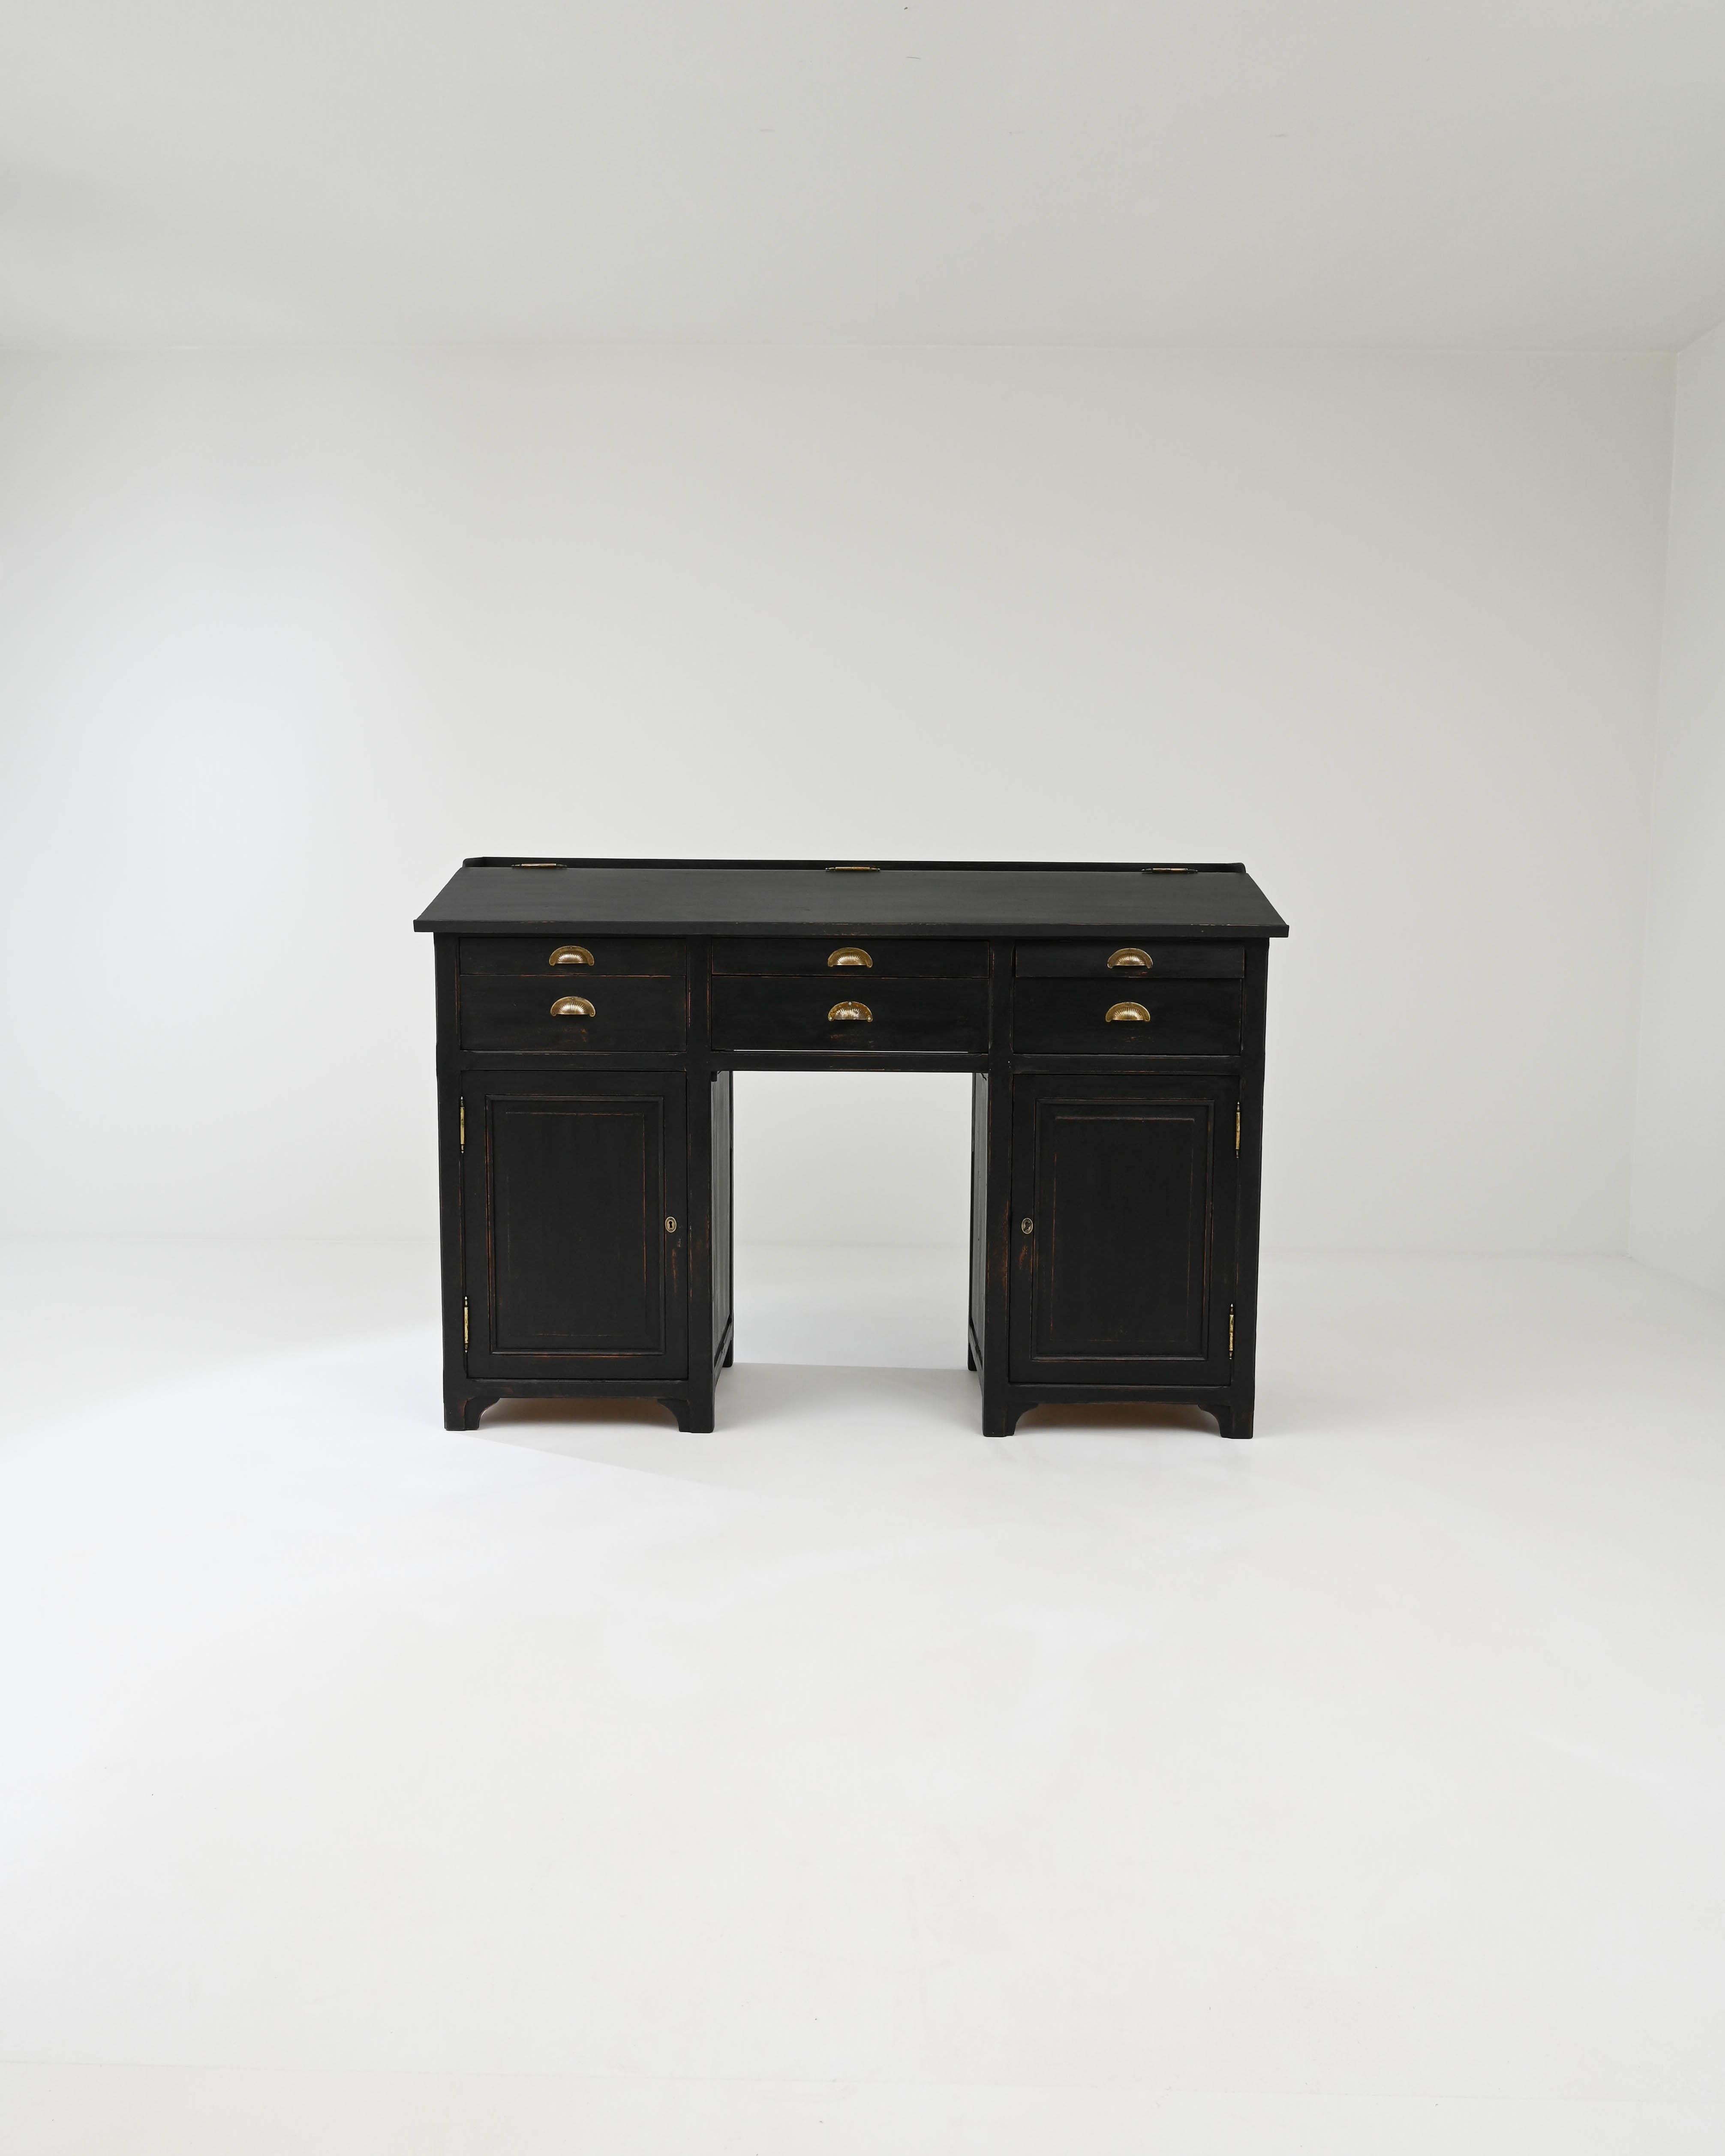 The commanding presence of this 19th-century French desk is attributed to its square pedestal structure. The ensemble of six drawers is perched upon two sturdy legs, which also double as spacious compartments. The tabletop can be raised, offering